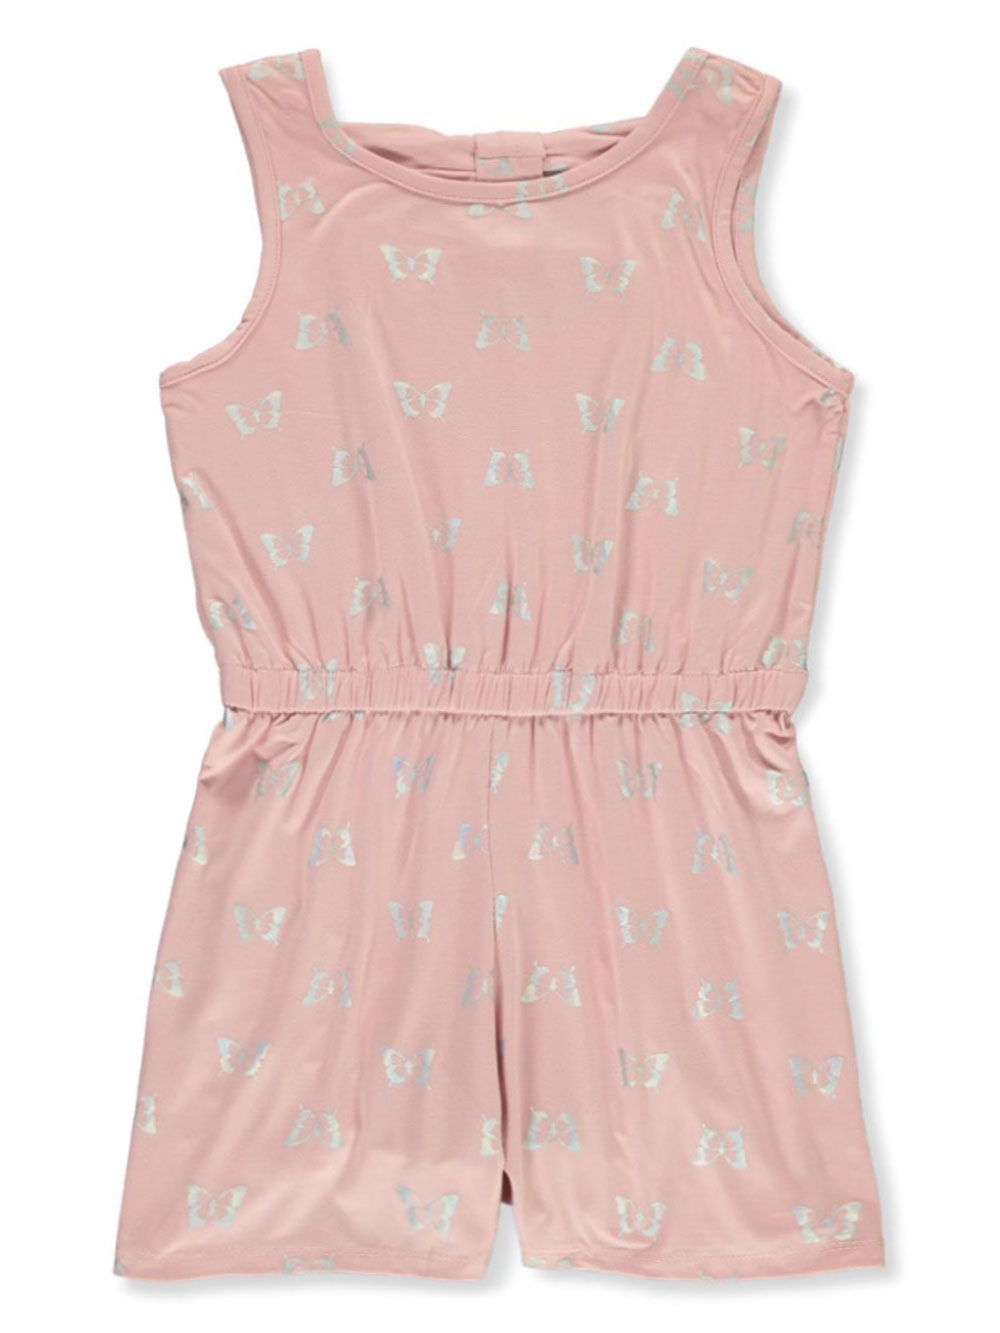 Size 8-10 Rompers Jumpsuits for Girls